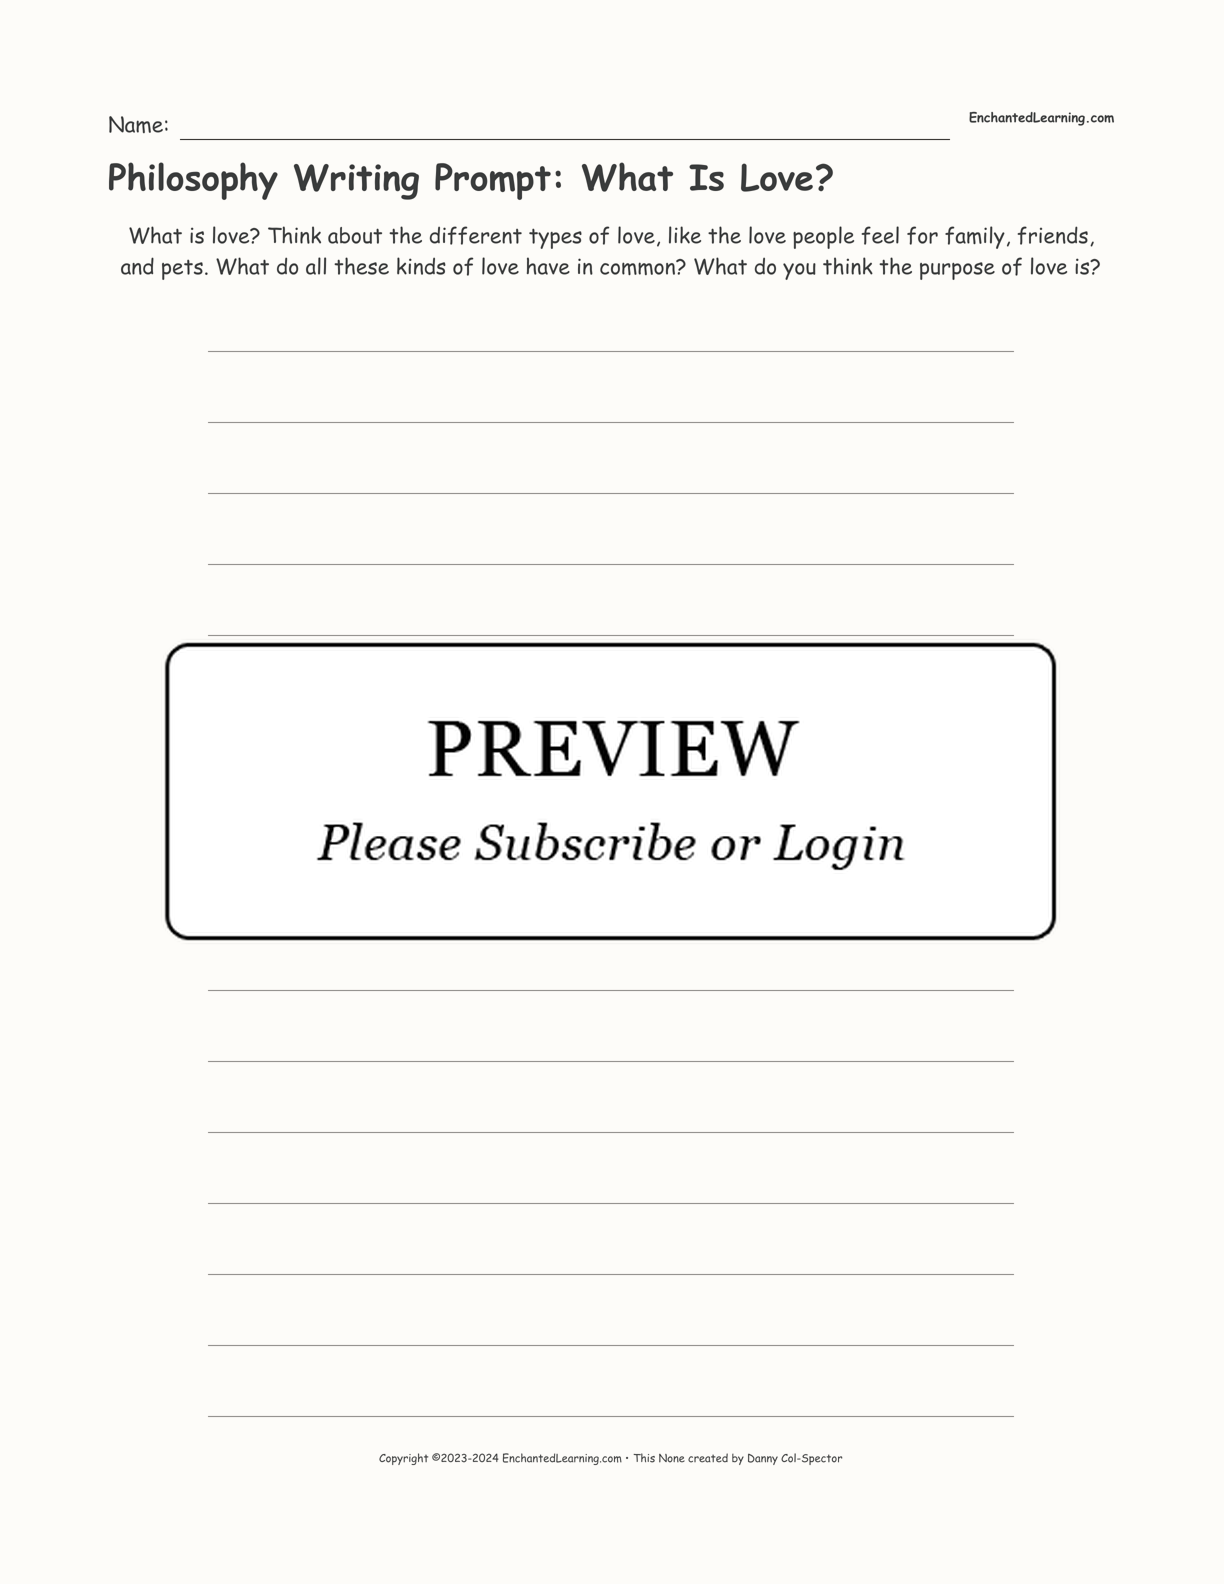 Philosophy Writing Prompt: What Is Love? interactive printout page 1